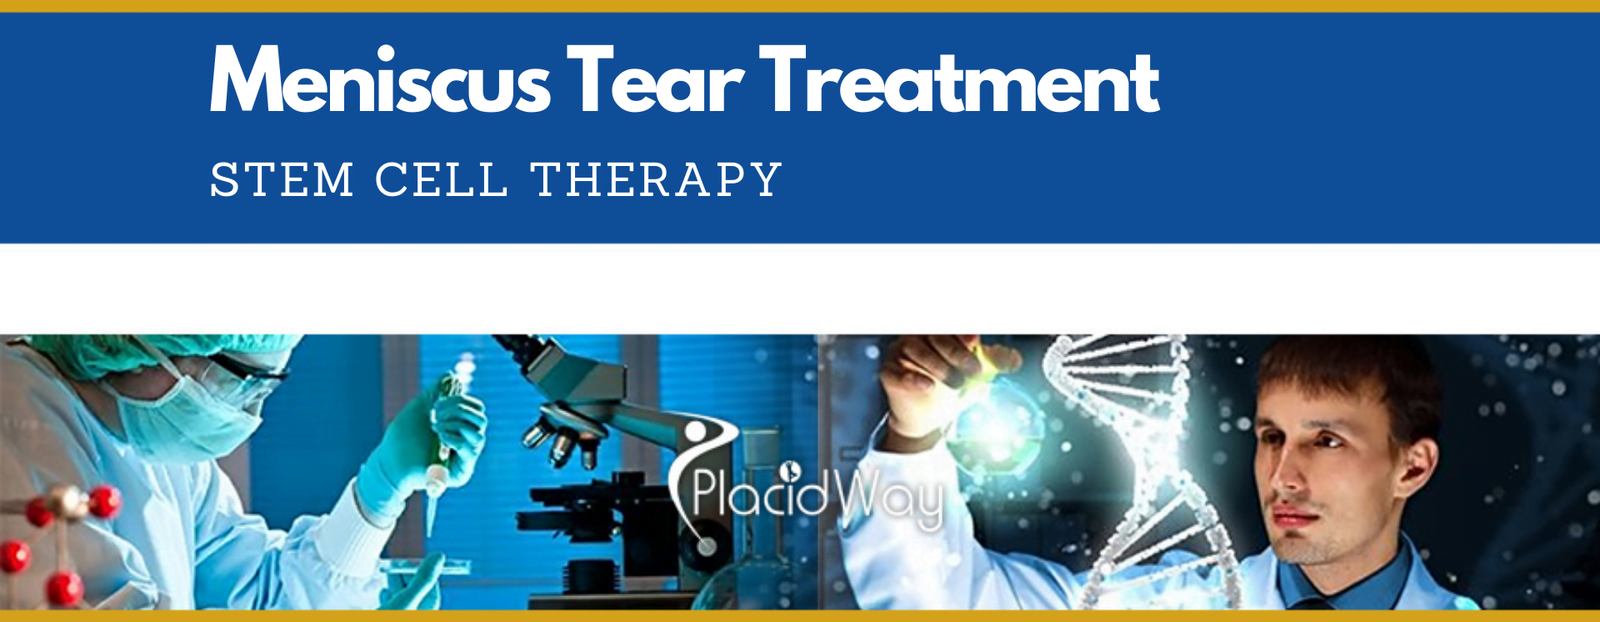 Stem Cell Theray for Menscus Tear